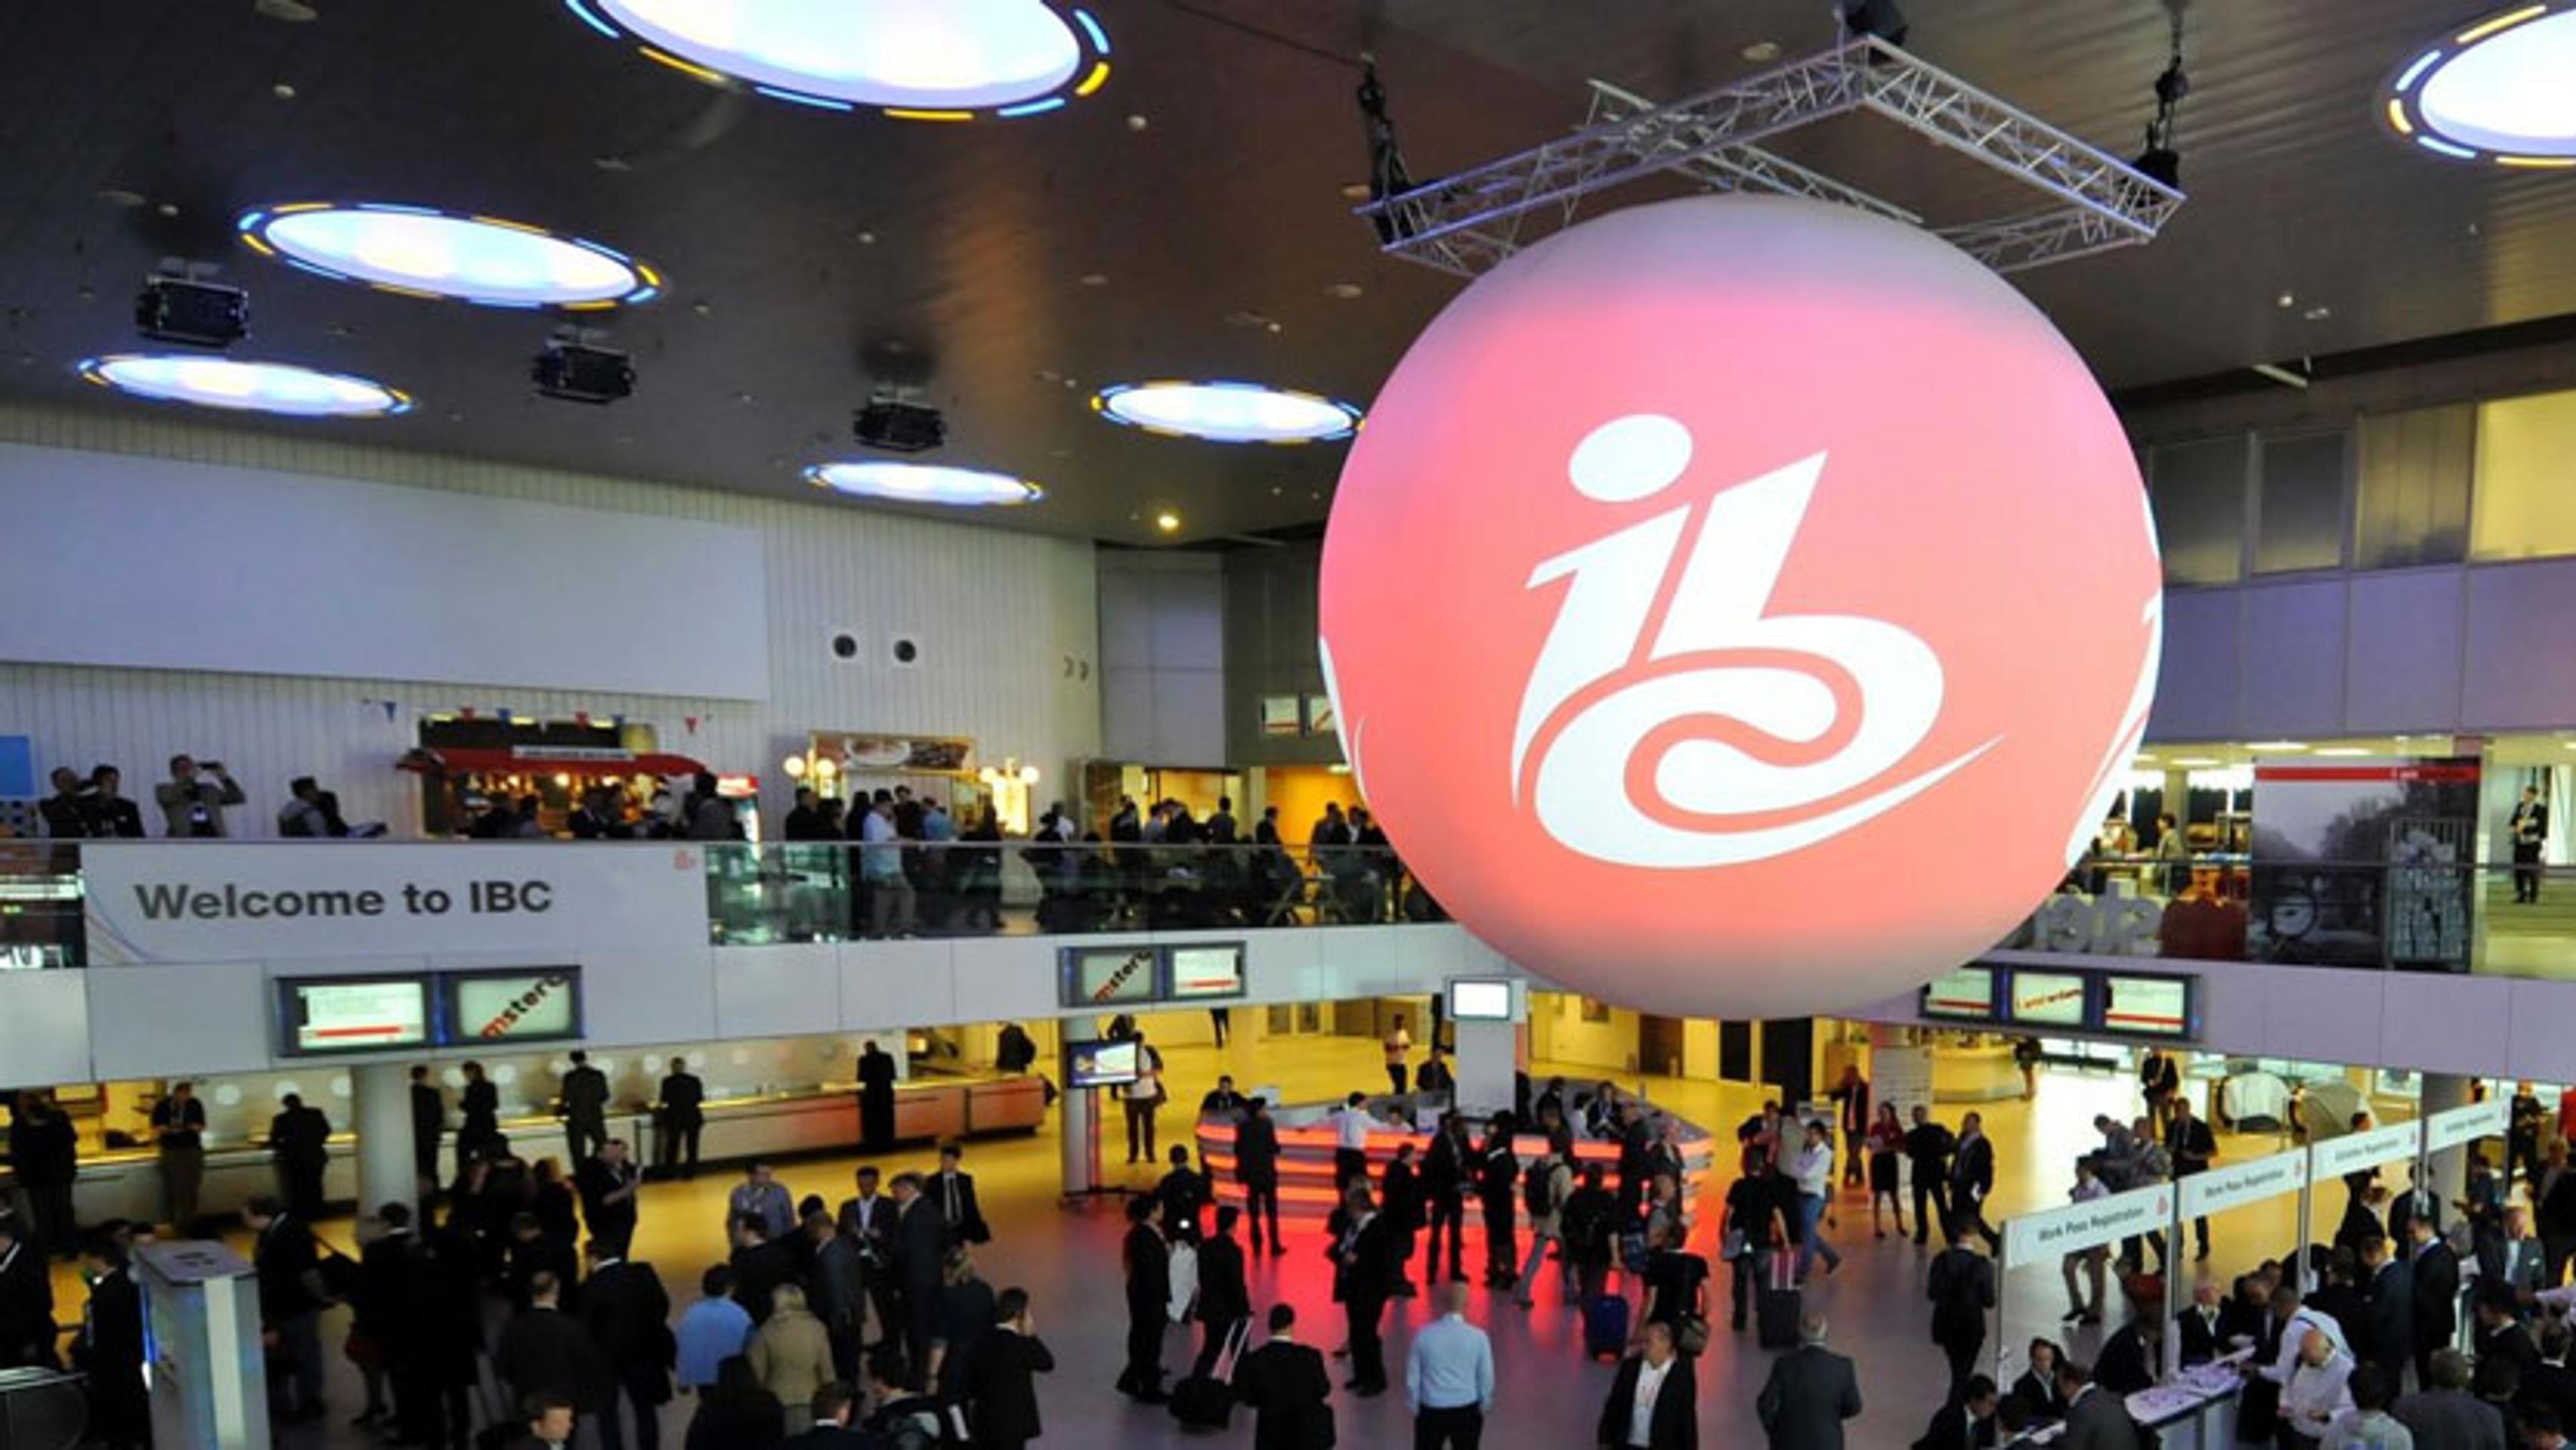 Improving viewer experiences through innovation at IBC 2019